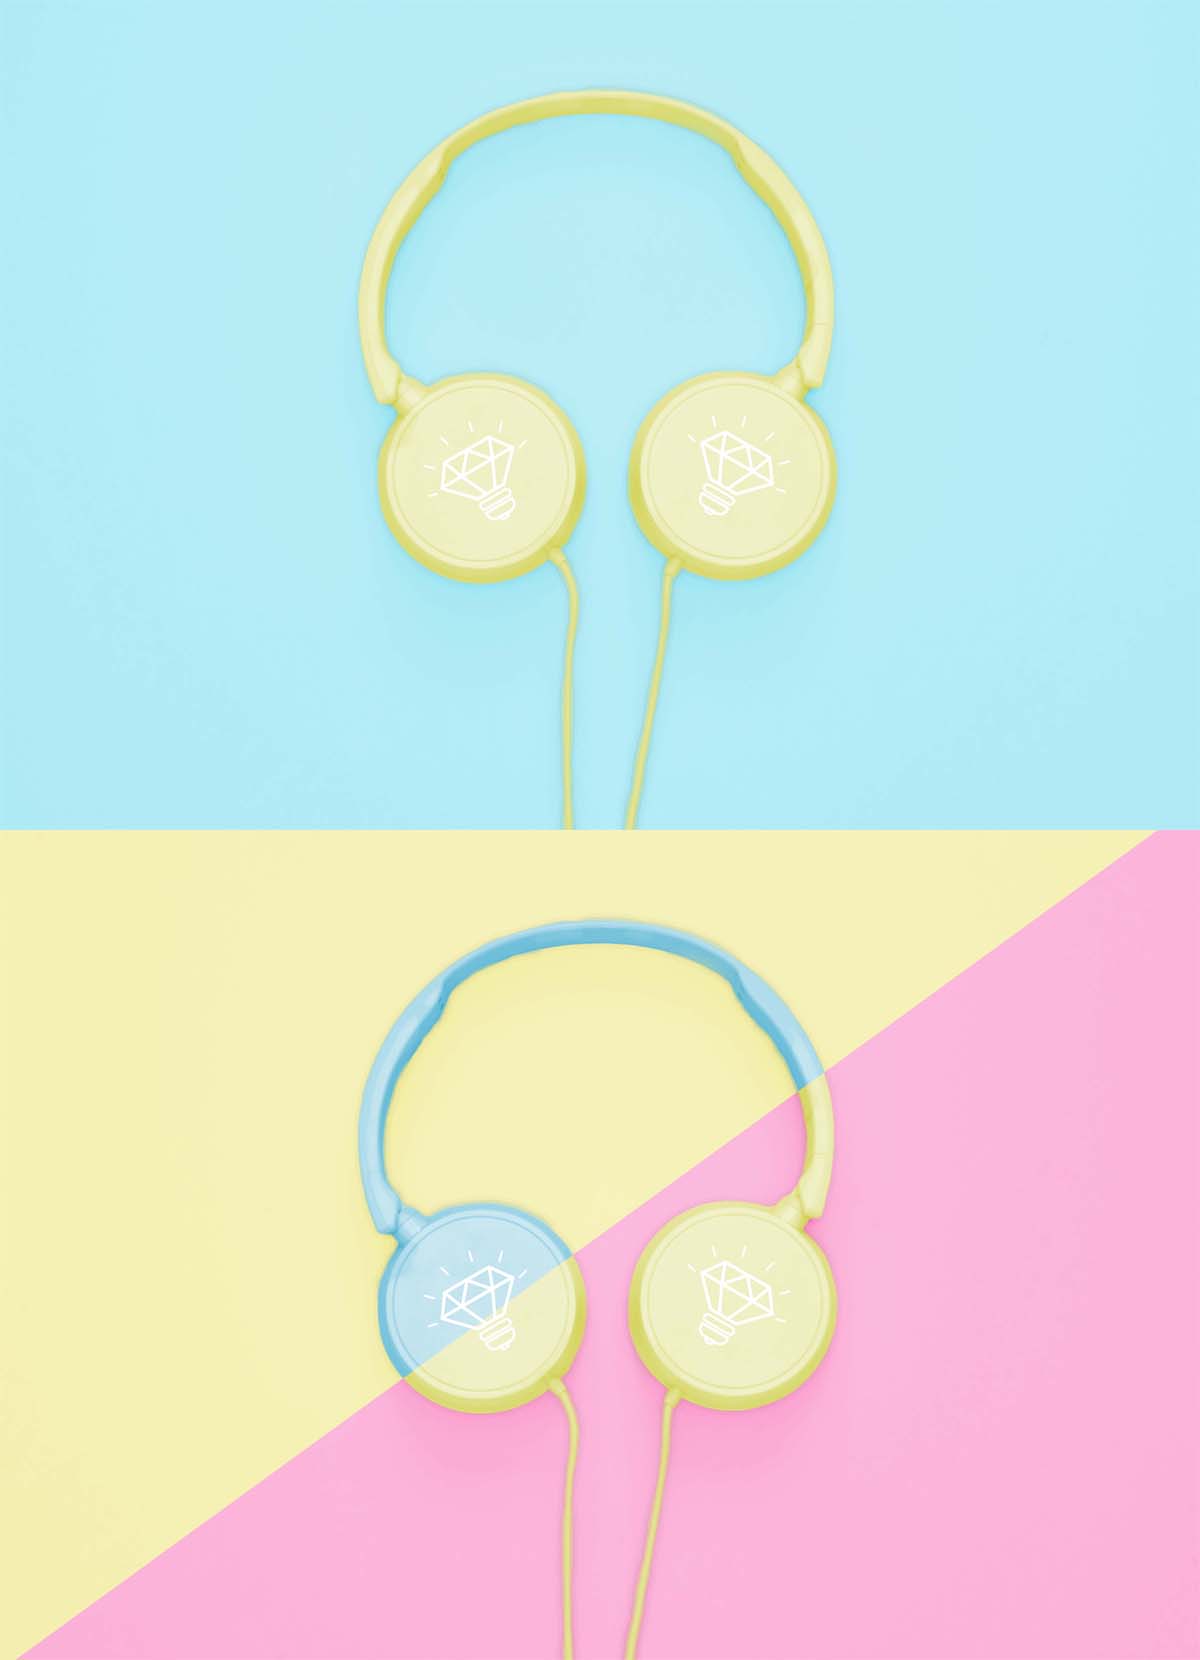 Download Free Headphones Mockup (PSD) - Find the Perfect Creative ...